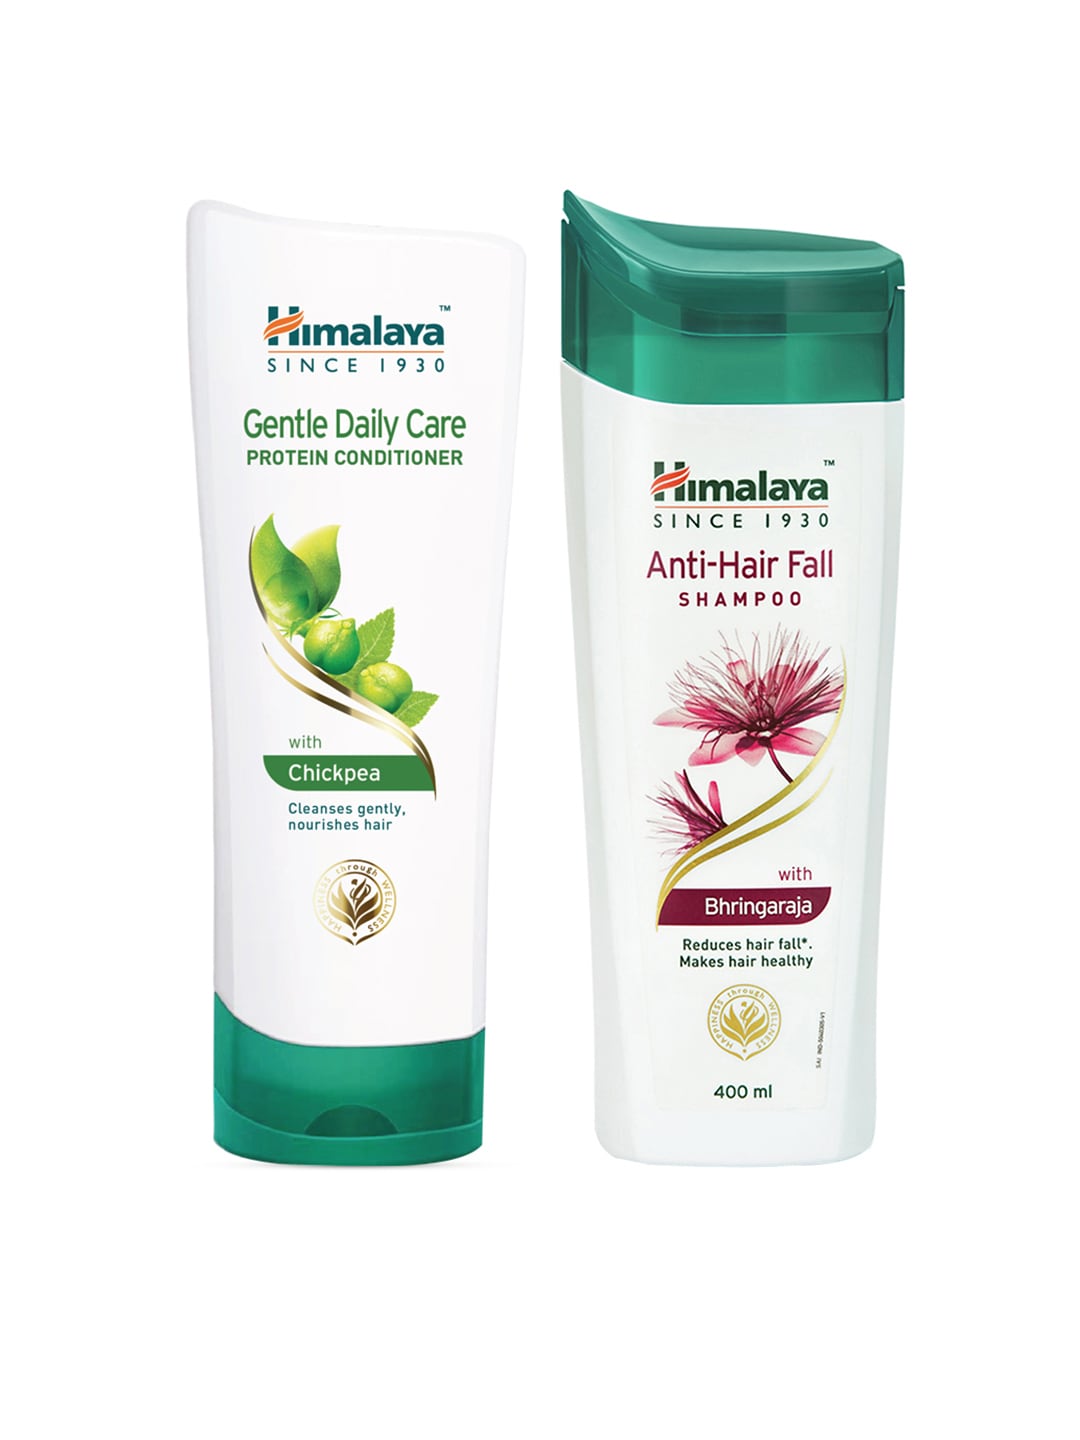 Himalaya Set of Anti-Hair Fall Shampoo & Gentle Daily Care Protein Conditioner Price in India